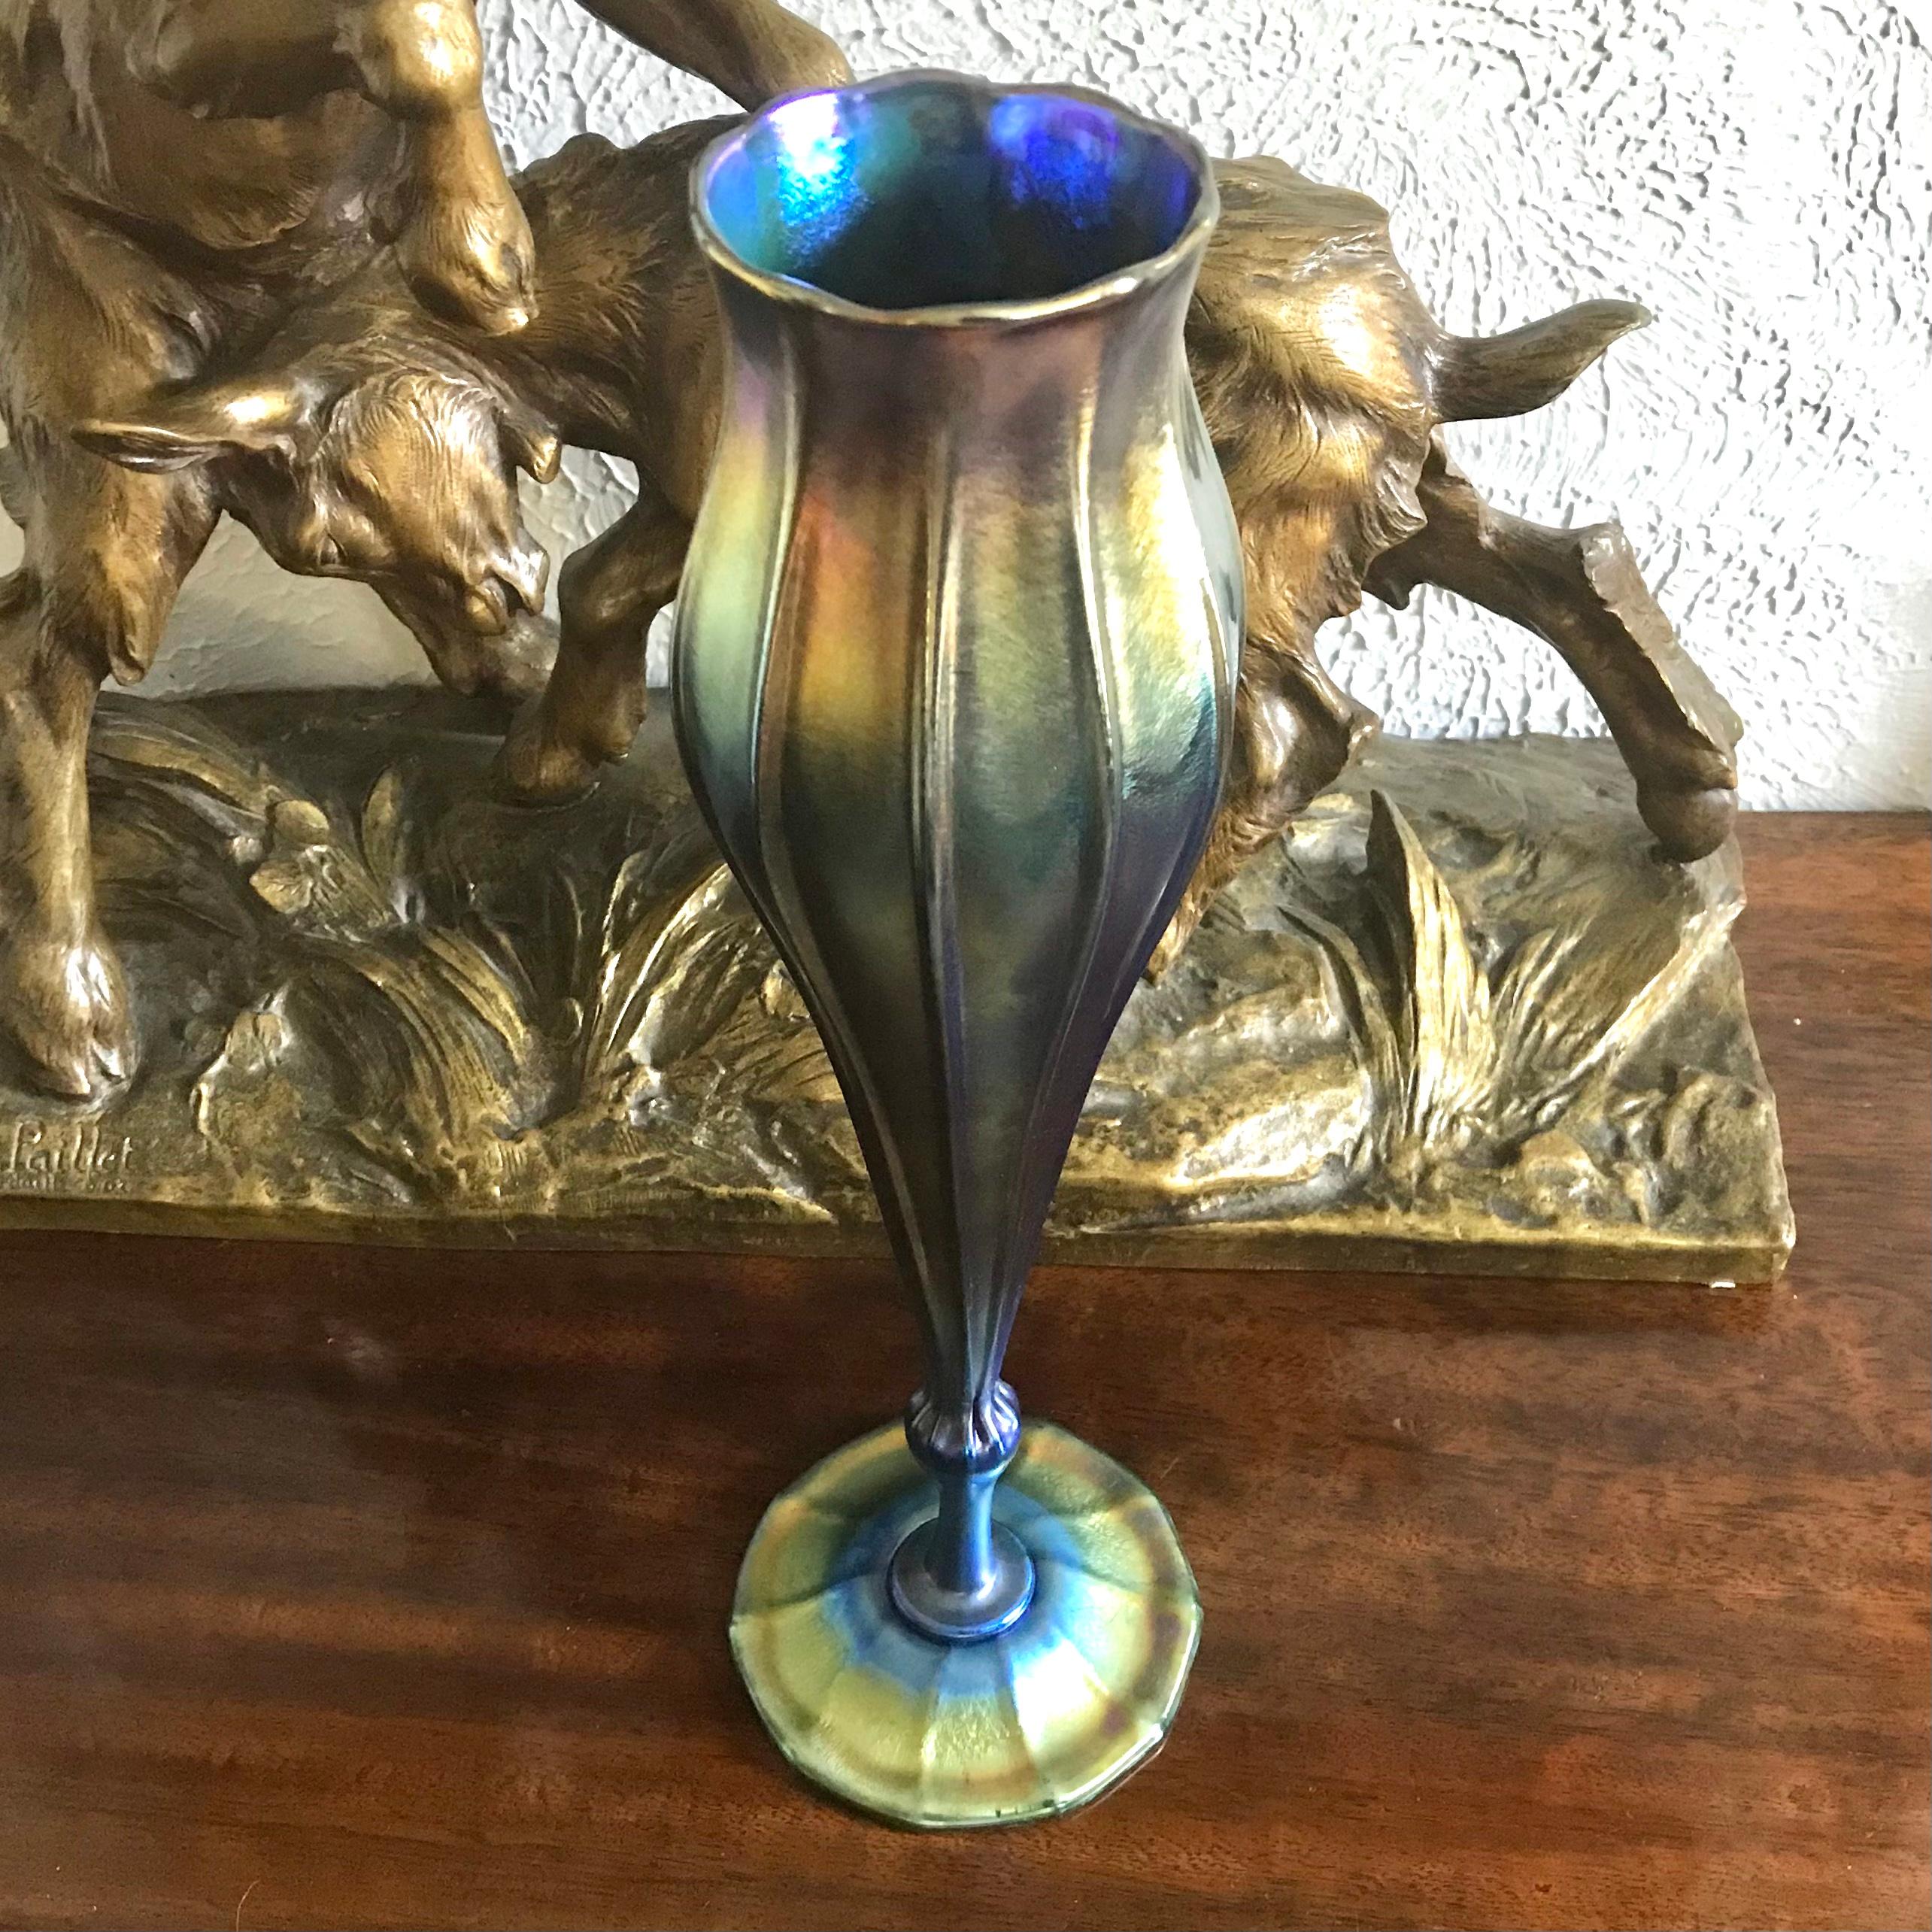 A spectacular Louis Comfort Tiffany favrile vase with a rainbow or iridescent colors ranging from blue, green, gold, purple and red. Standing tall at over 15 inches, this ribbed pedestaled floriform Tiffany case is special and magnificent. Art